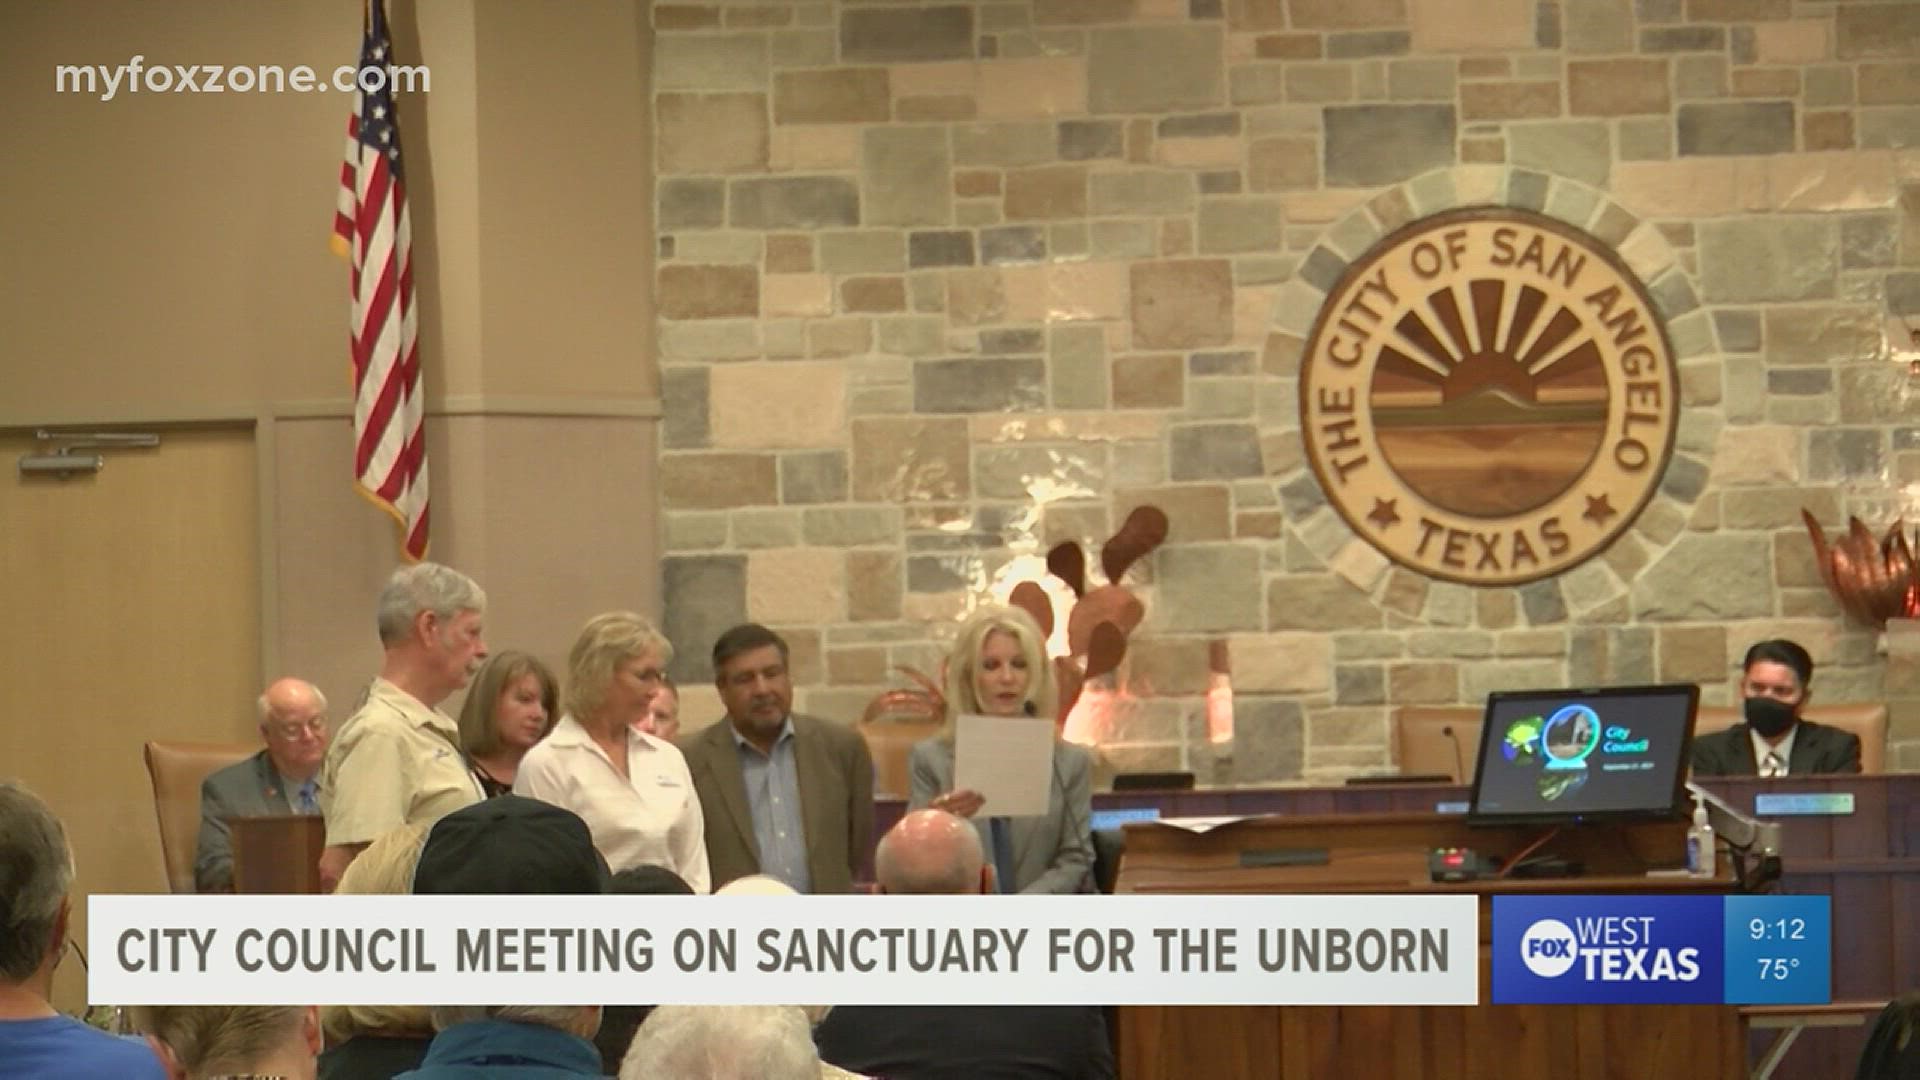 The topic of public comment at Tuesday morning's City Council meeting touched on San Angelo becoming sanctuary city for the unborn.